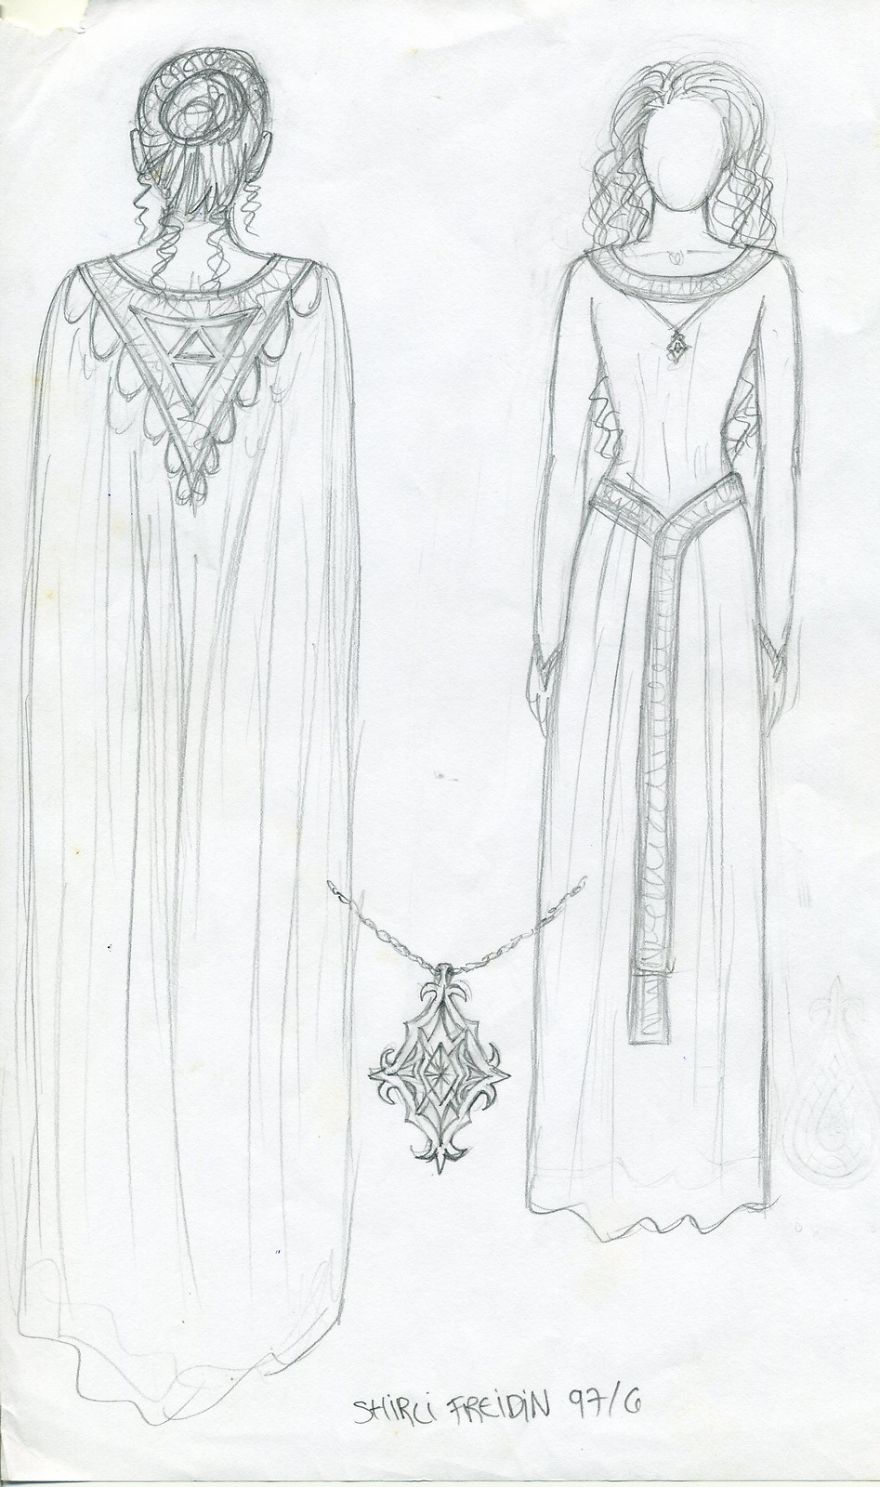 My First Jewelry Design, Which I Drew When I Was 16 Years Old